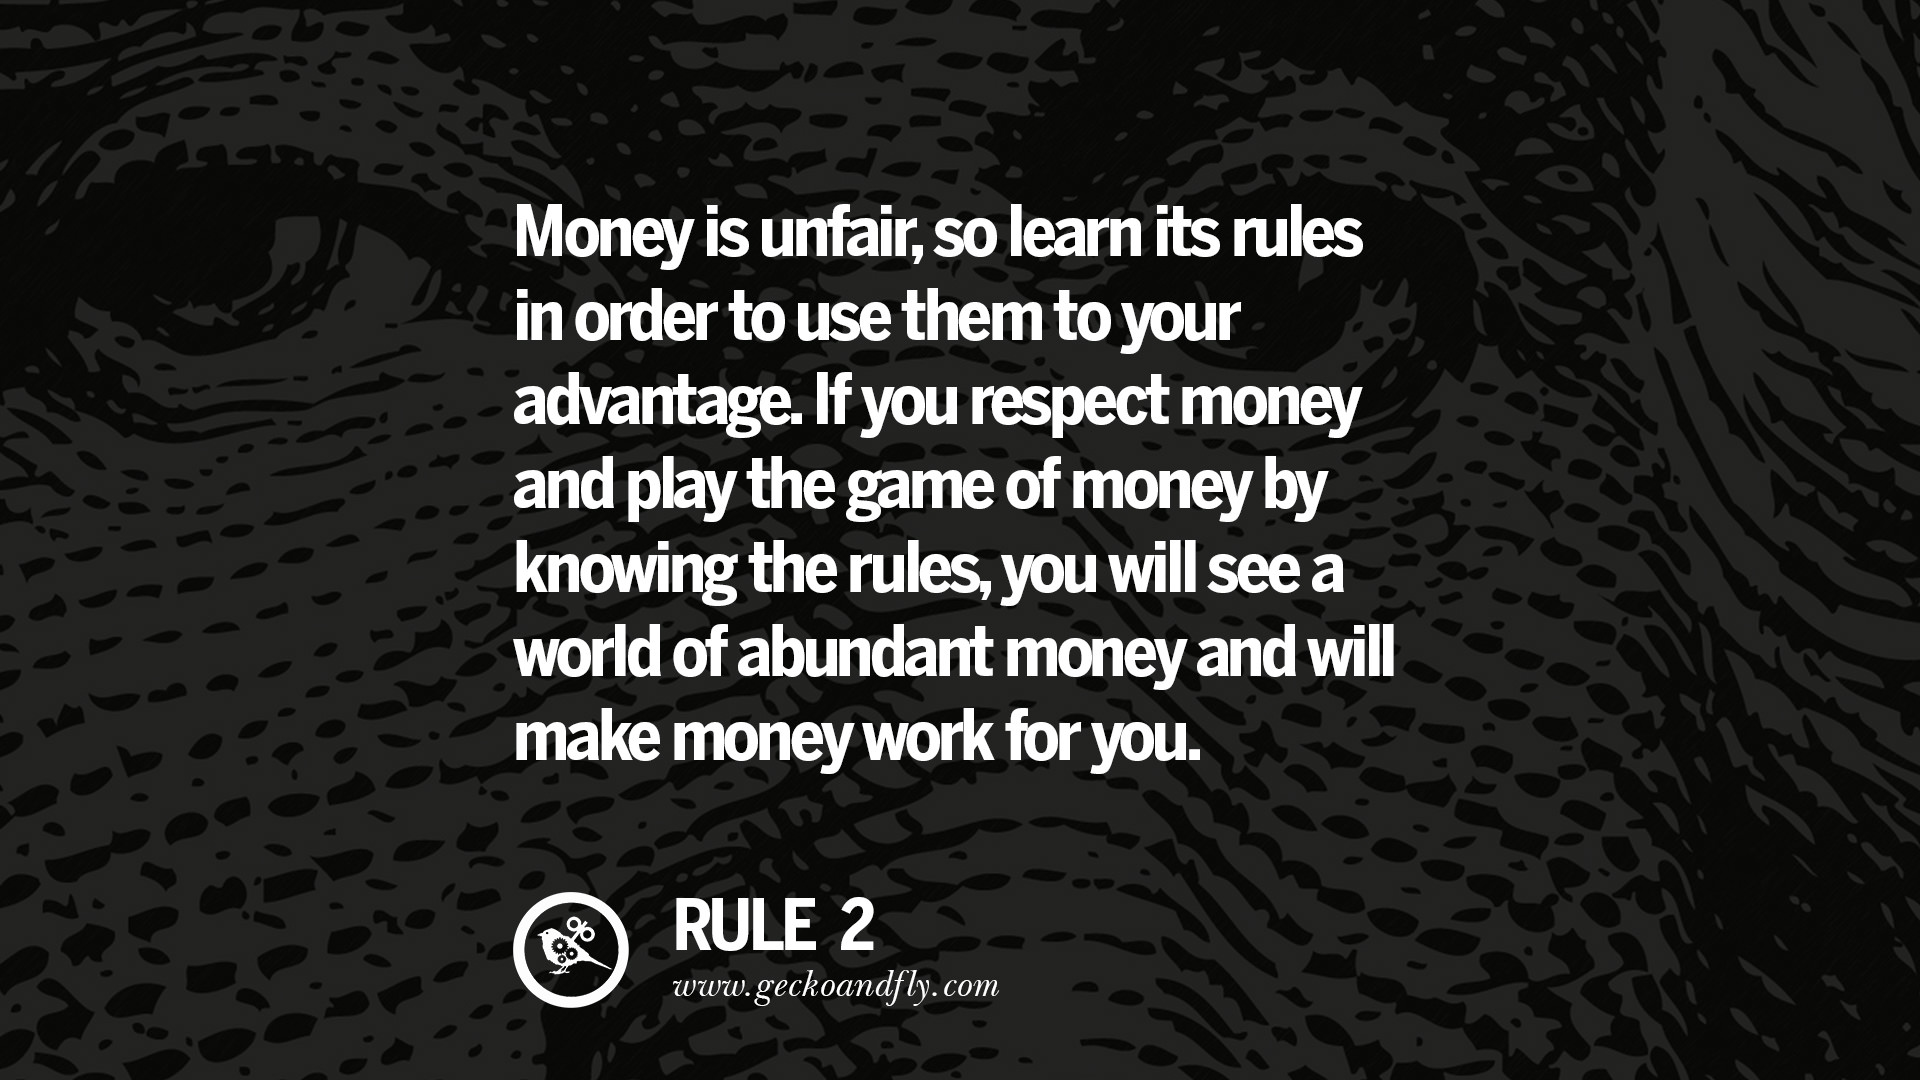 10 Golden Rules On Money & 20 Inspiring Quotes About Money